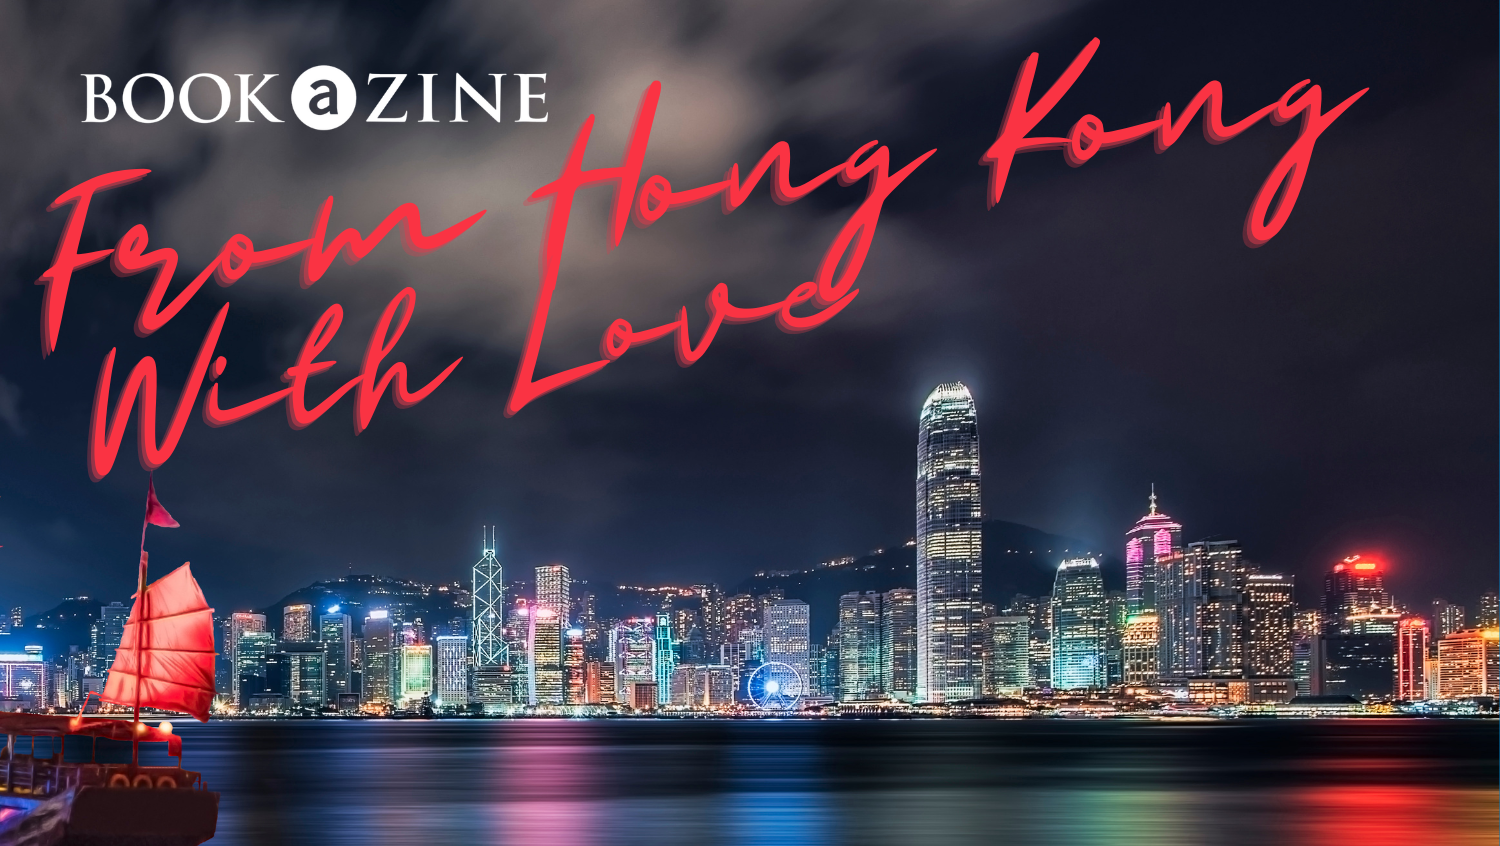 Hong Kong Gifts to Bring Home: Not Your Average Souvenirs